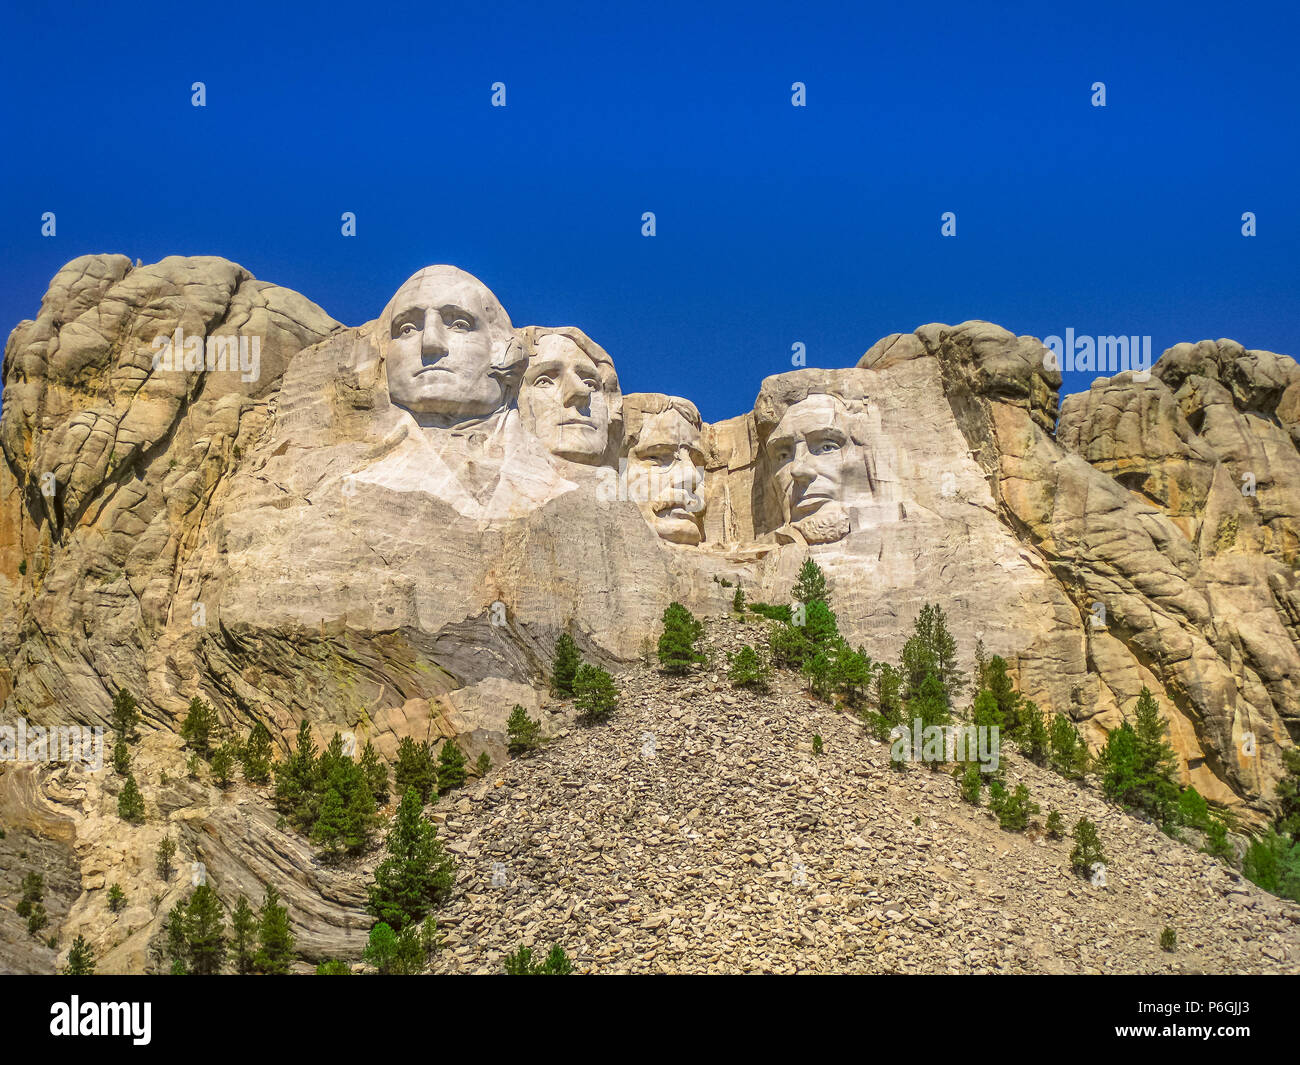 4th july memorial, Mount Rushmore National Memorial of United States of America and National Park in South Dakota. Presidents: George Washington, Thomas Jefferson, Theodore Roosevelt, Abraham Lincoln Stock Photo